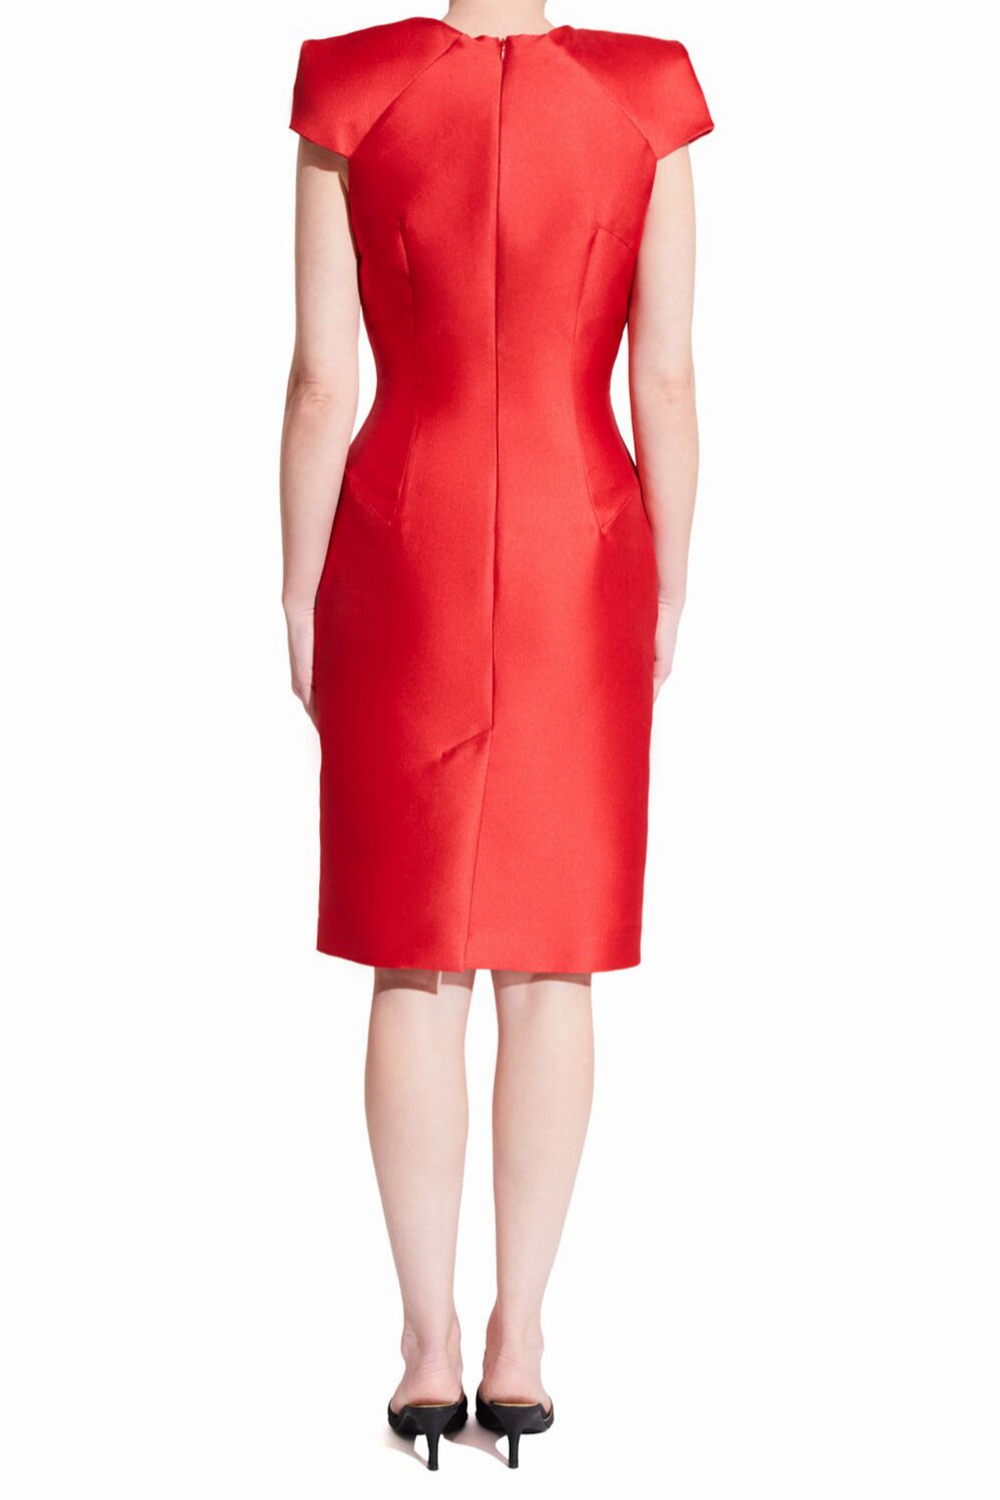 Short red bodycon cocktail dress with centered back slit and oragami style cap sleeves 